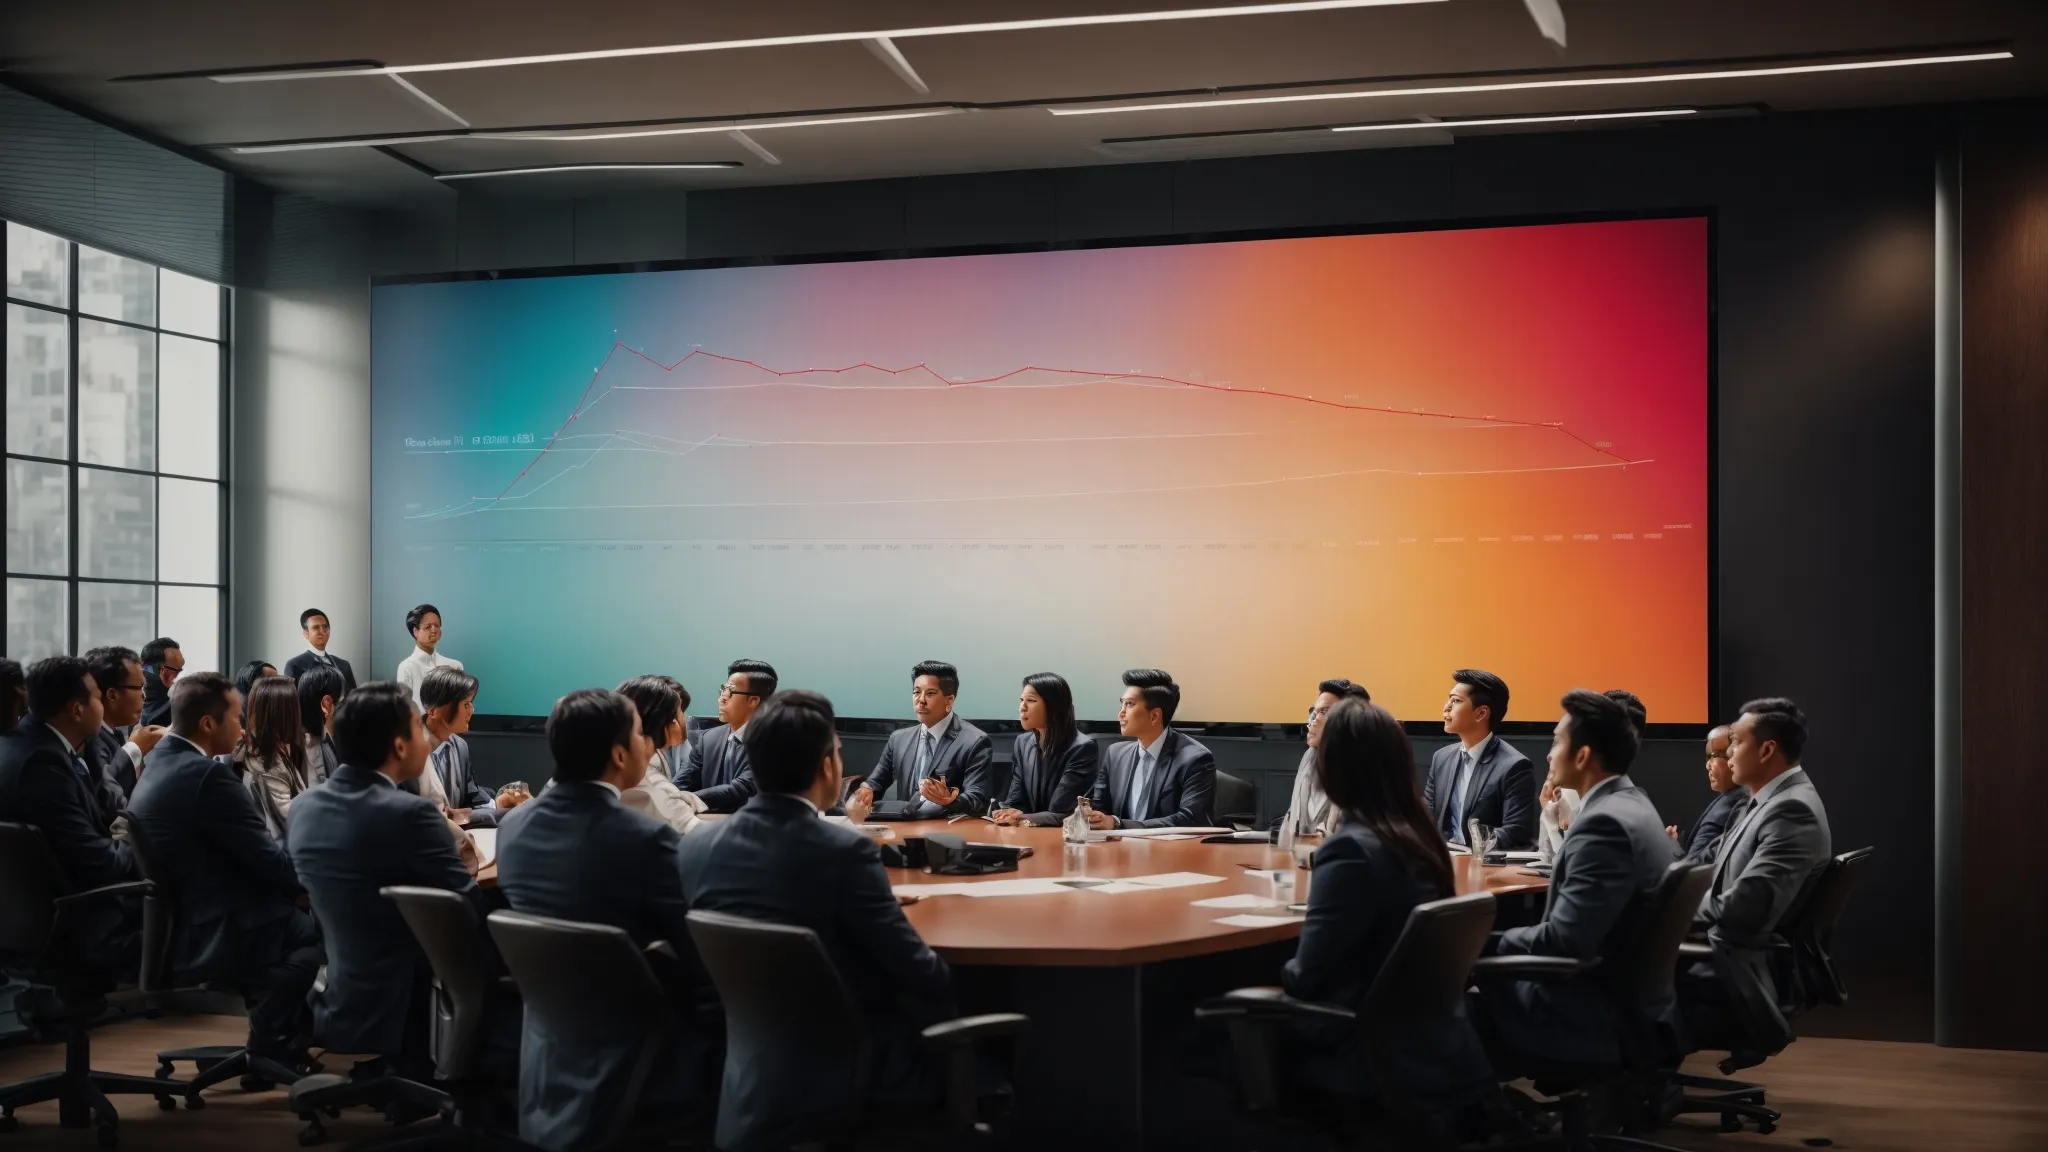 a conference room with a large screen displaying a colorful graph showing upward growth, surrounded by professionals attentively discussing strategies.